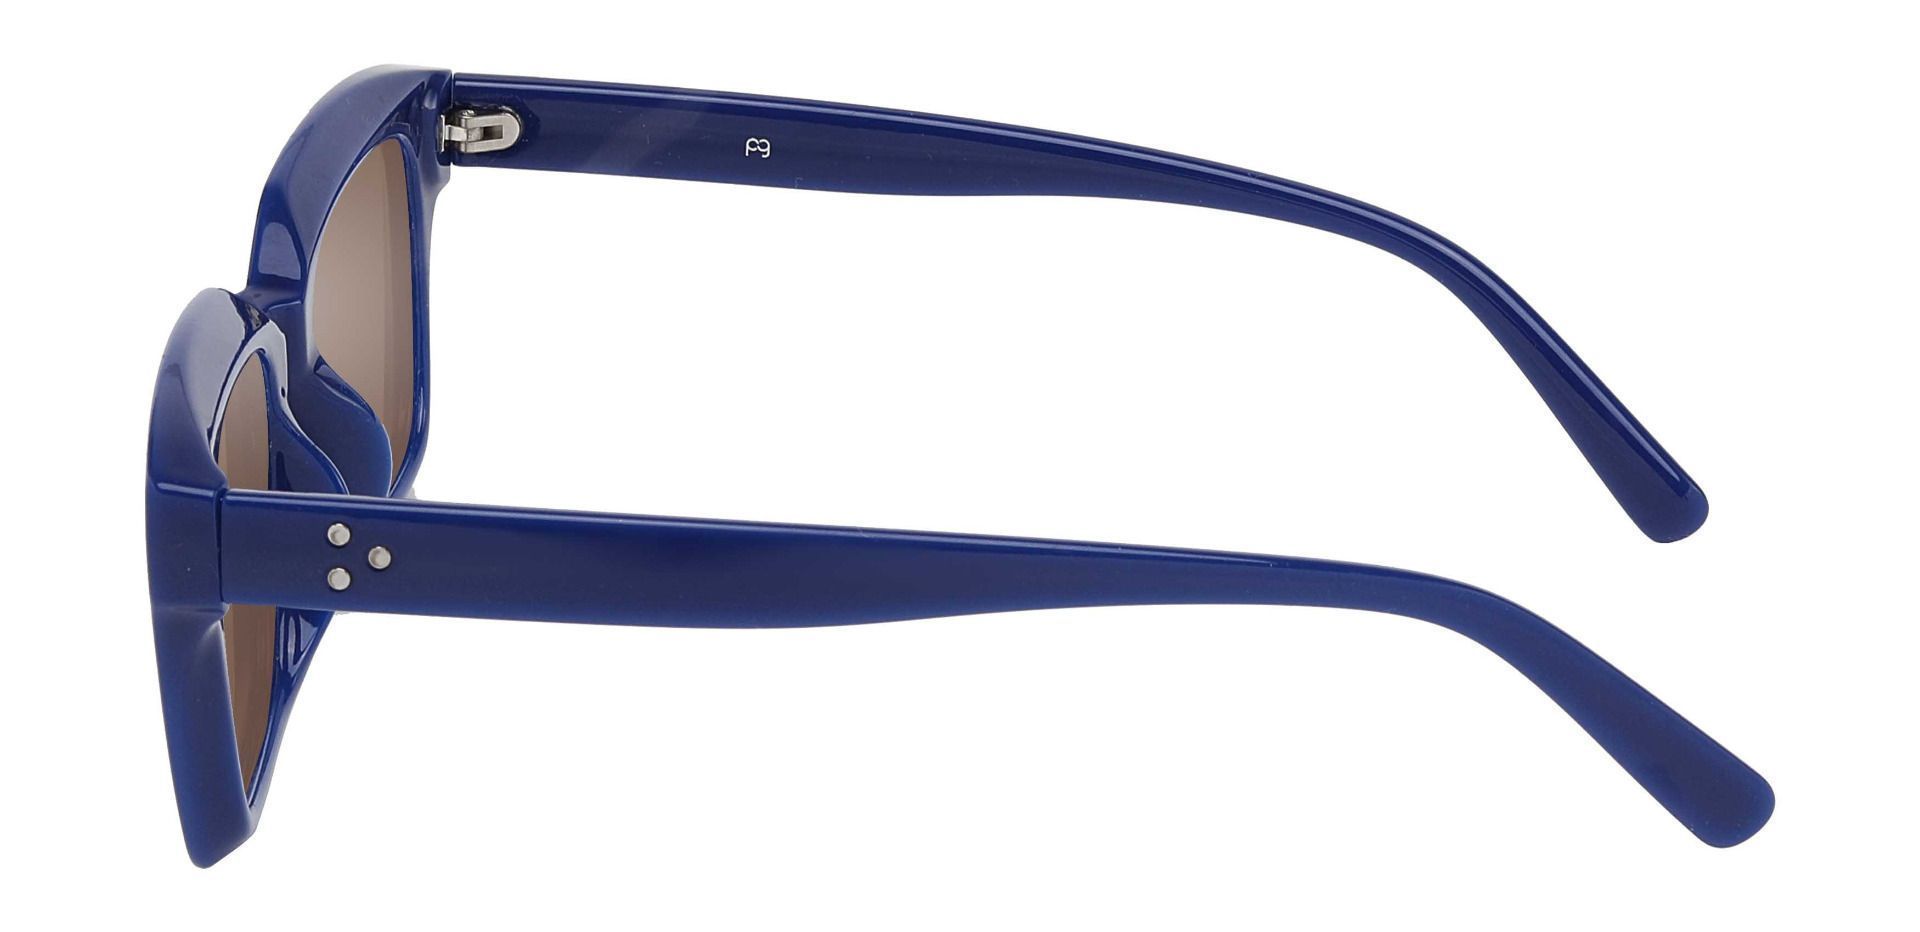 Unity Rectangle Non-Rx Sunglasses - Blue Frame With Brown Lenses